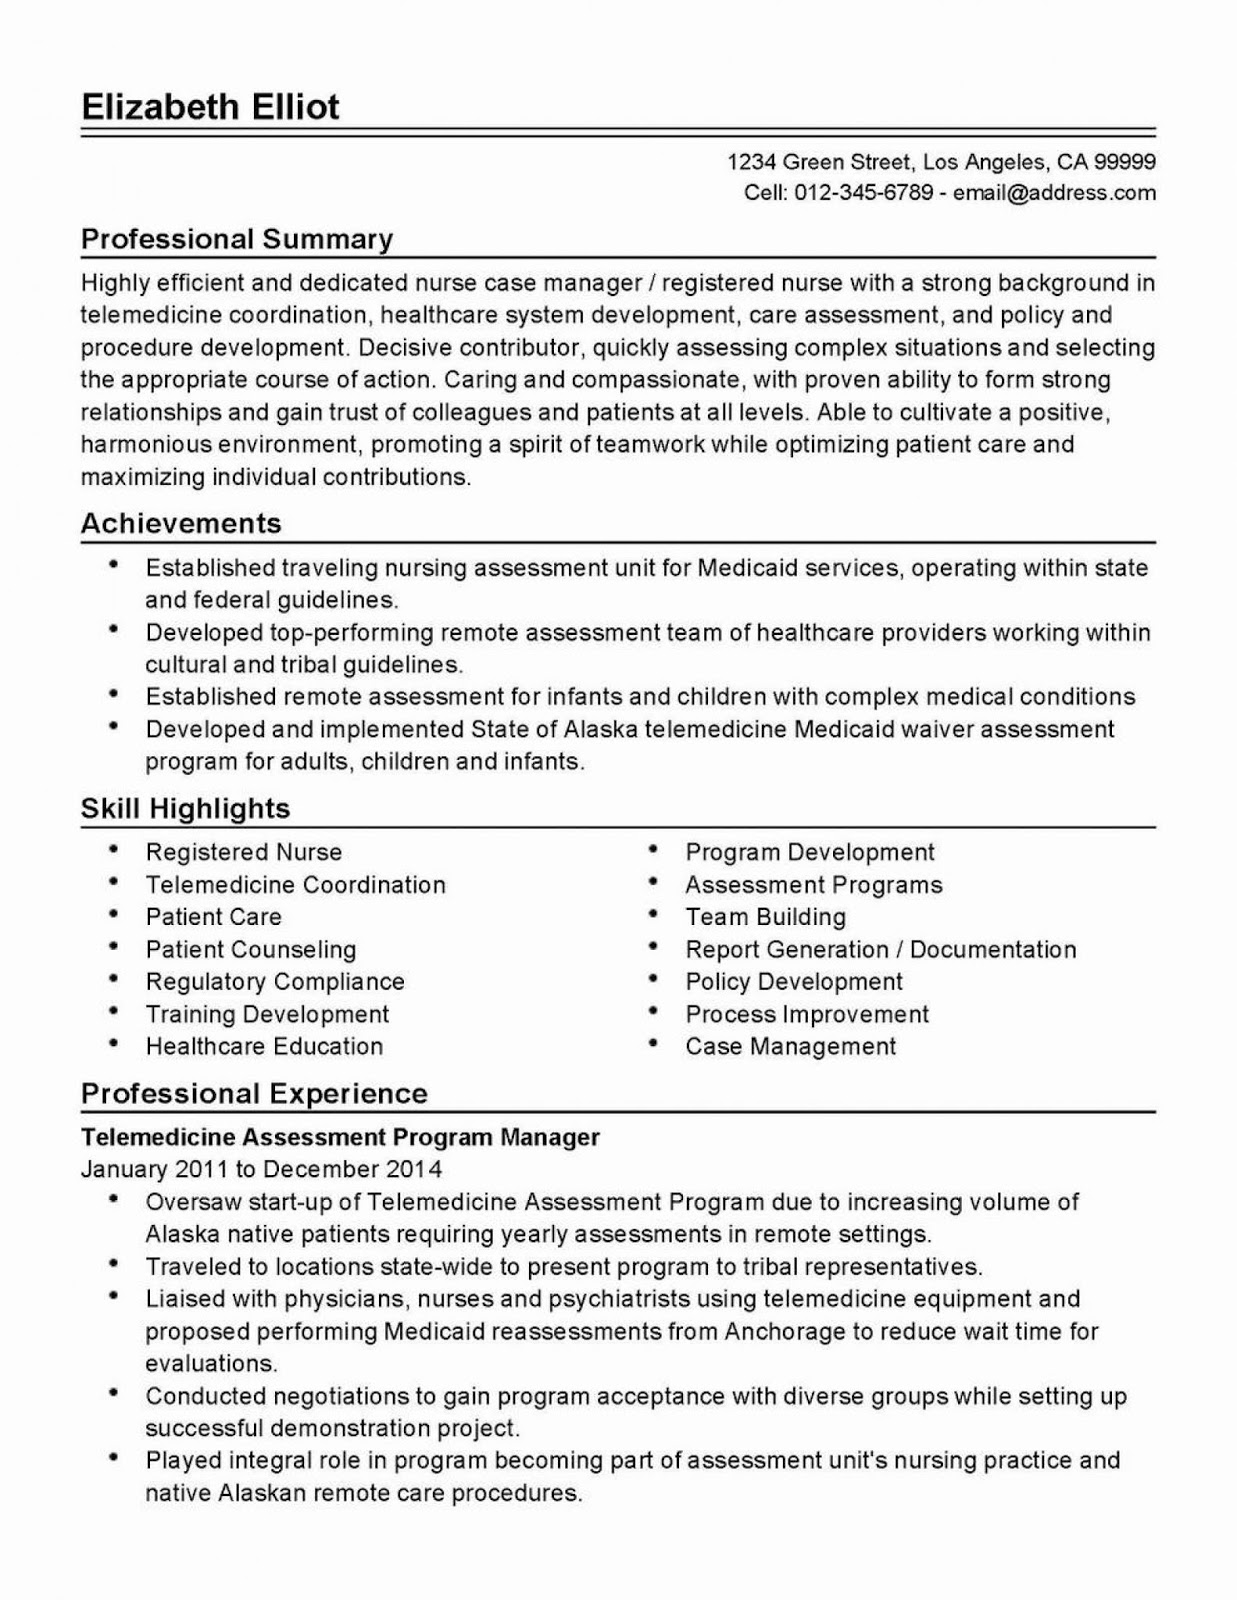 truck driver resume objective , truck driver resume objective statement 2019 , truck driver resume samples 2020, truck driver resume template word, truck driver resume template australia, cdl truck driver resume objective, dump truck driver resume objective tow truck driver resume objective entry level truck driver resume